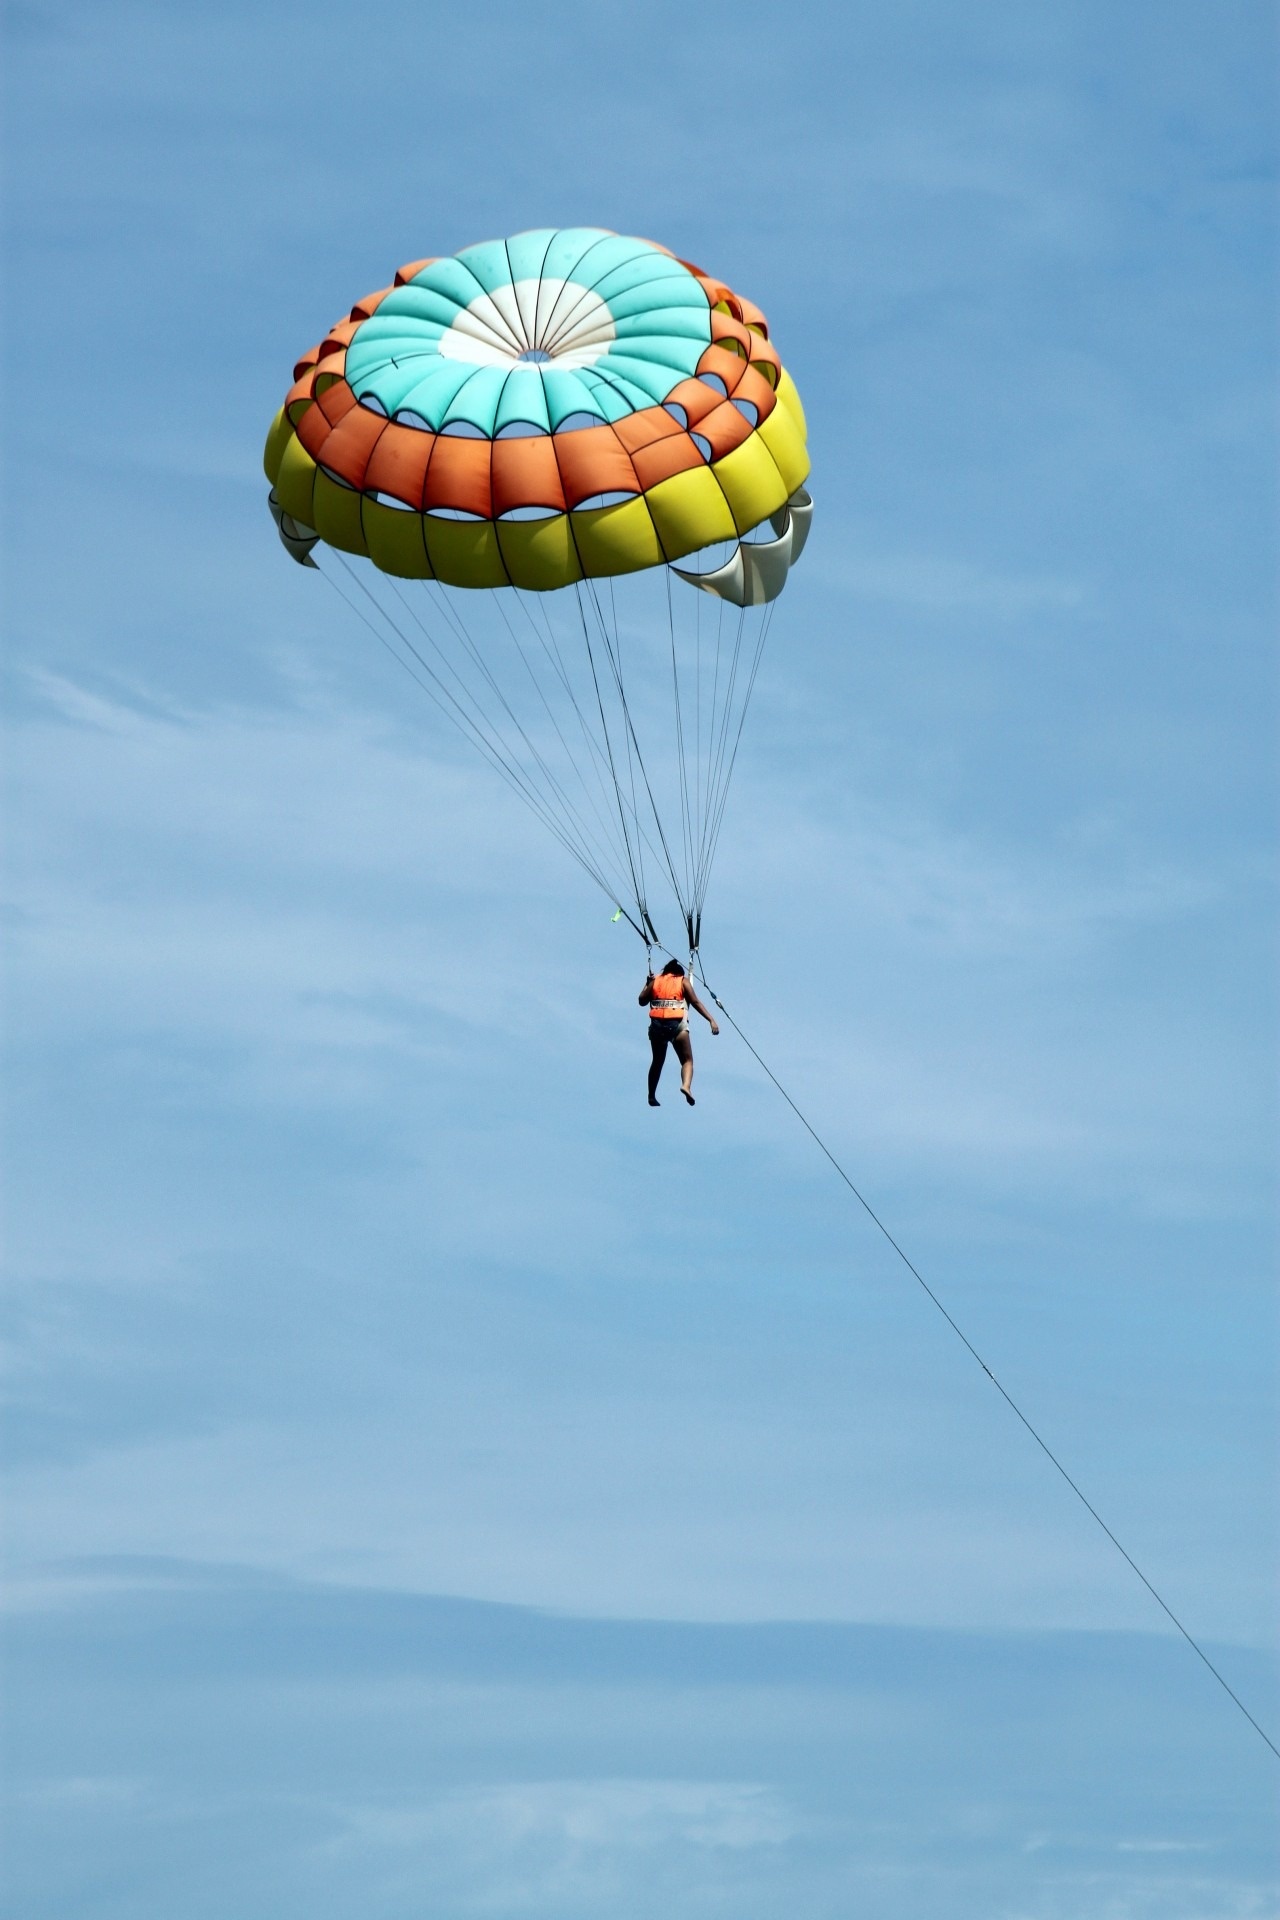 Parasailing: Skydiver, Solo flight, A once-in-a-lifetime experience, Mid-air, Extreme sports. 1280x1920 HD Wallpaper.